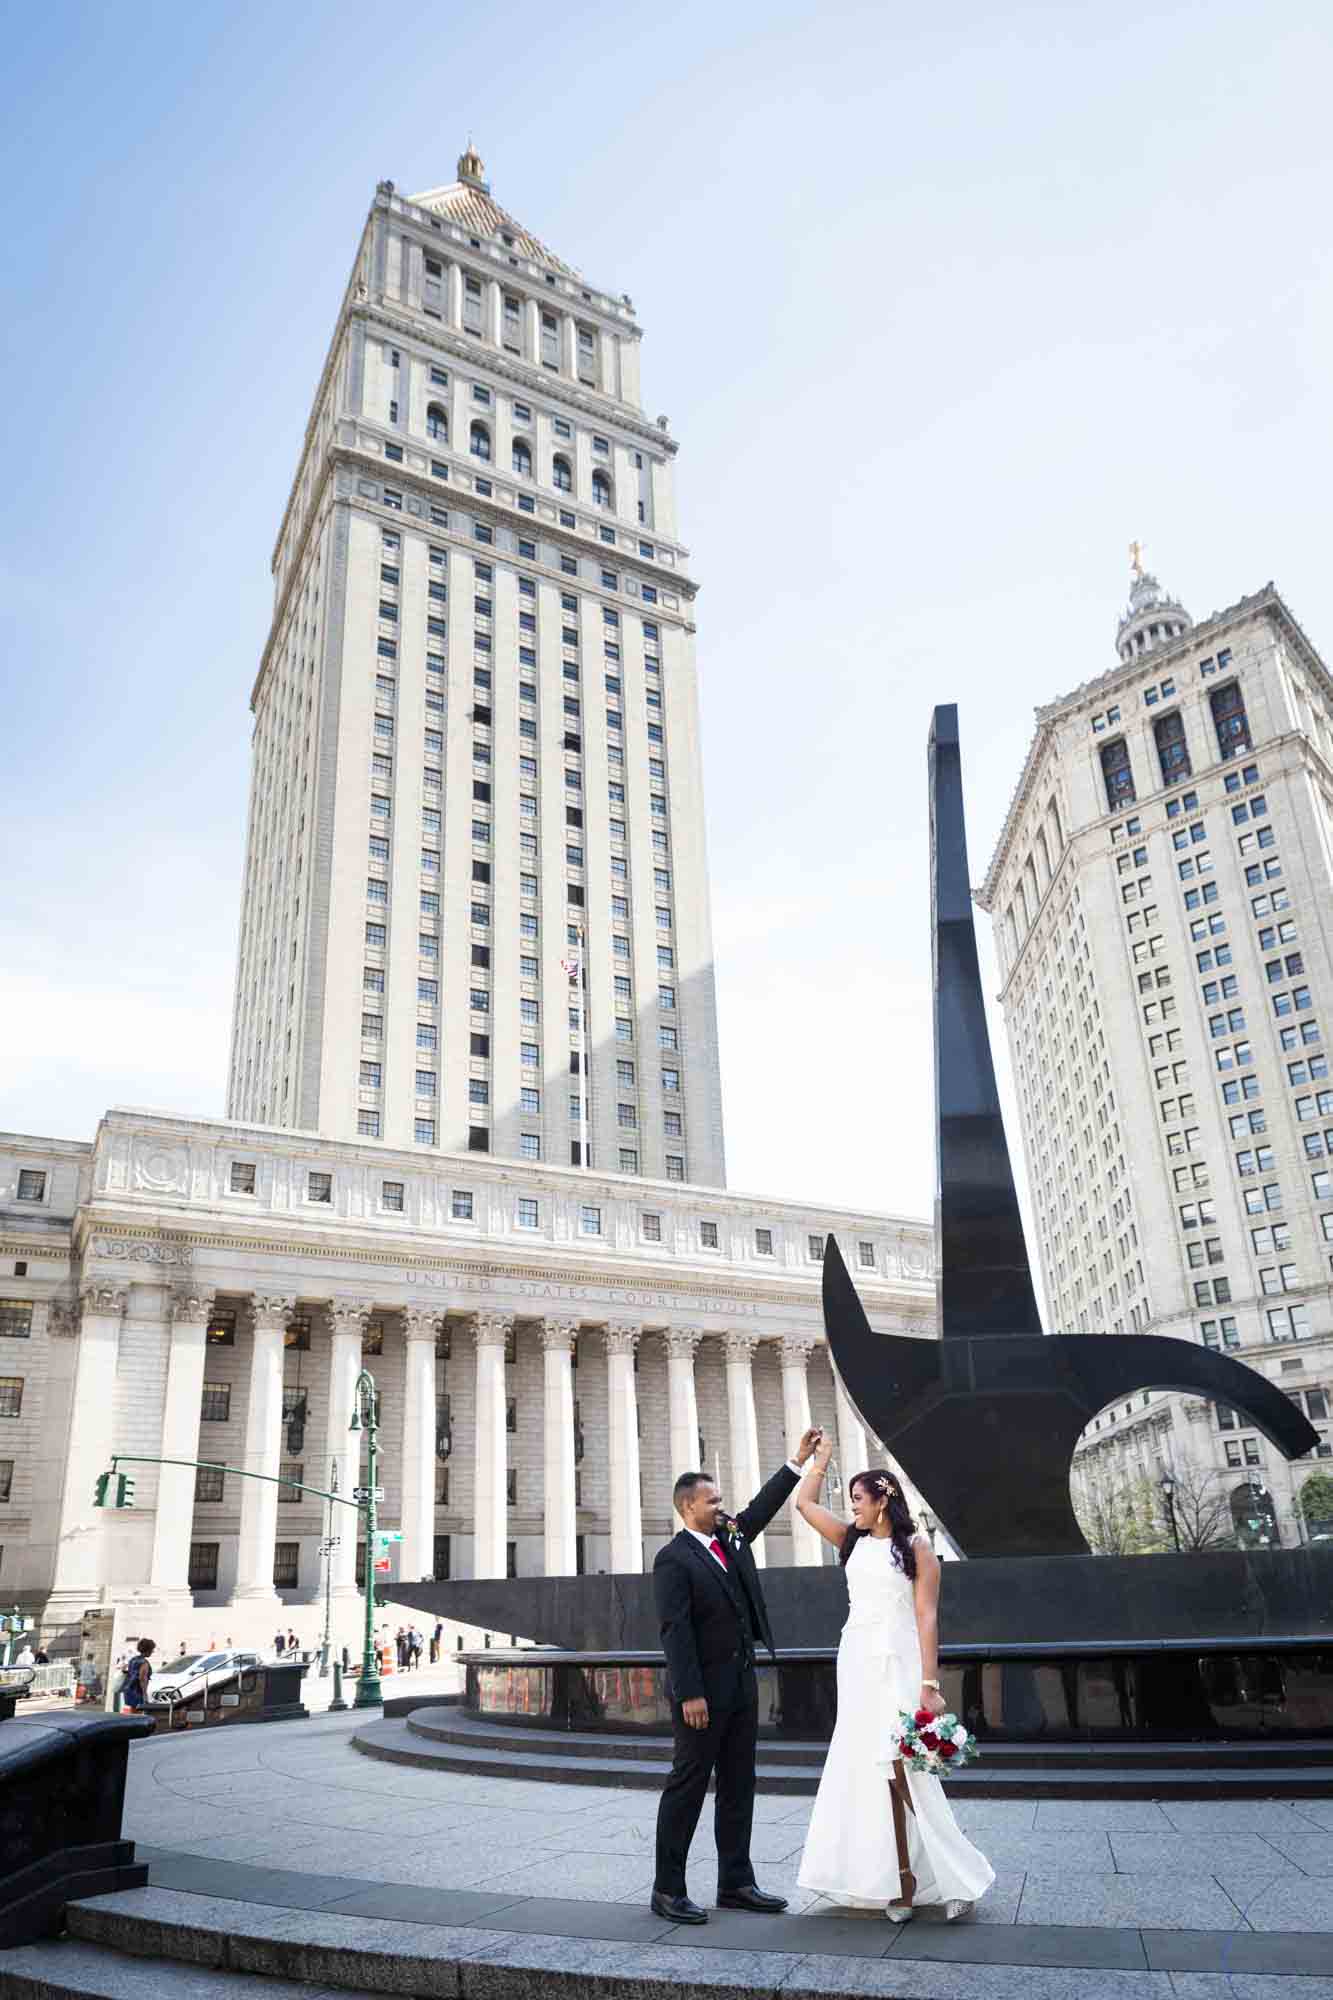 Bride and groom dancing on steps in front of sword statue and large building  at a NYC City Hall wedding